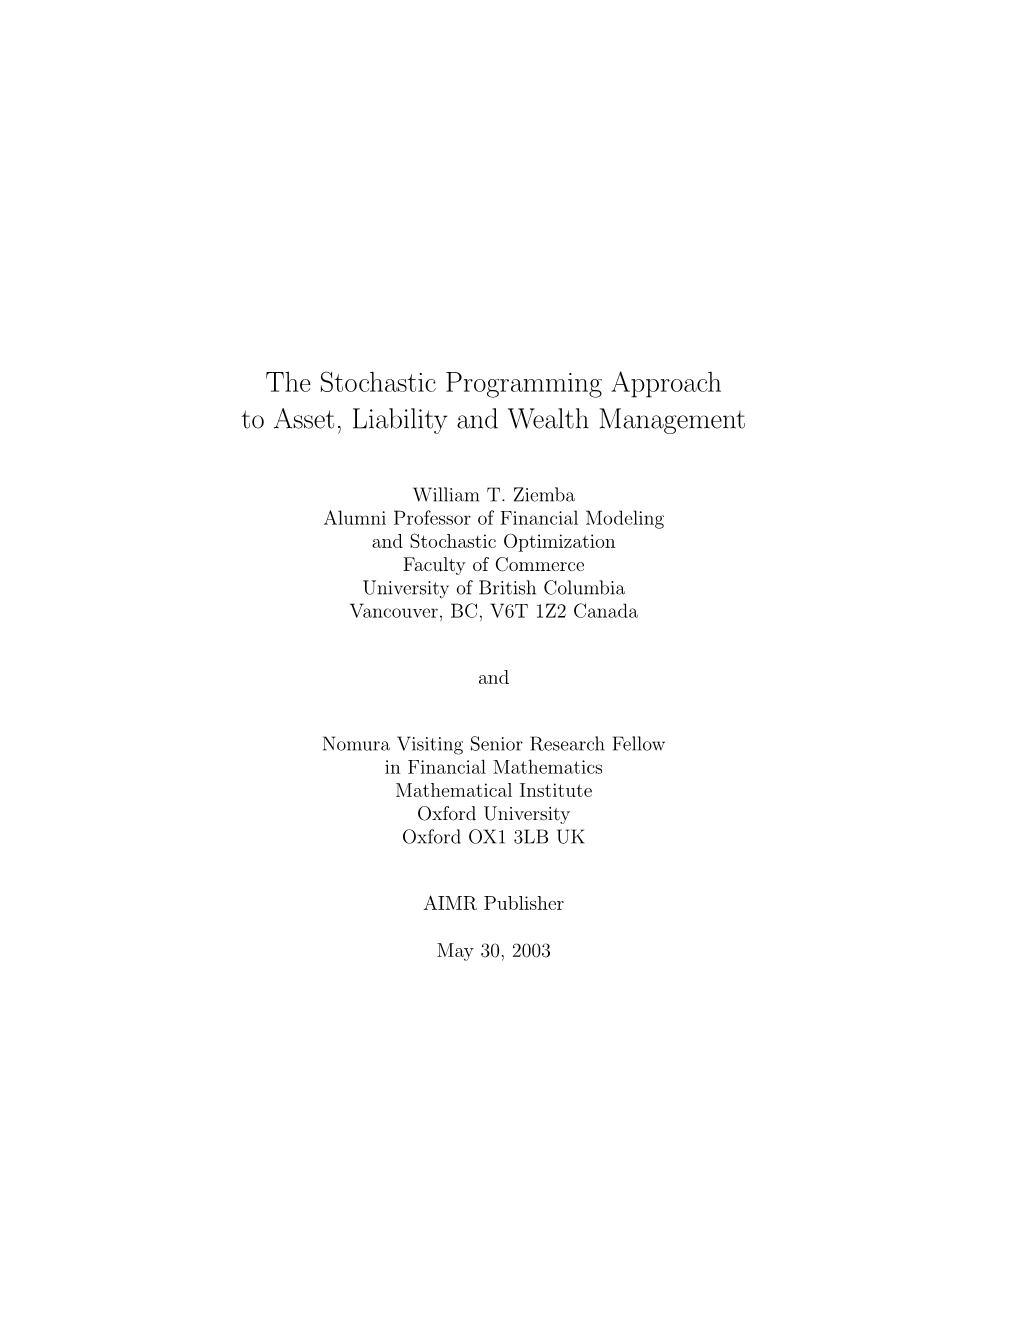 The Stochastic Programming Approach to Asset, Liability and Wealth Management